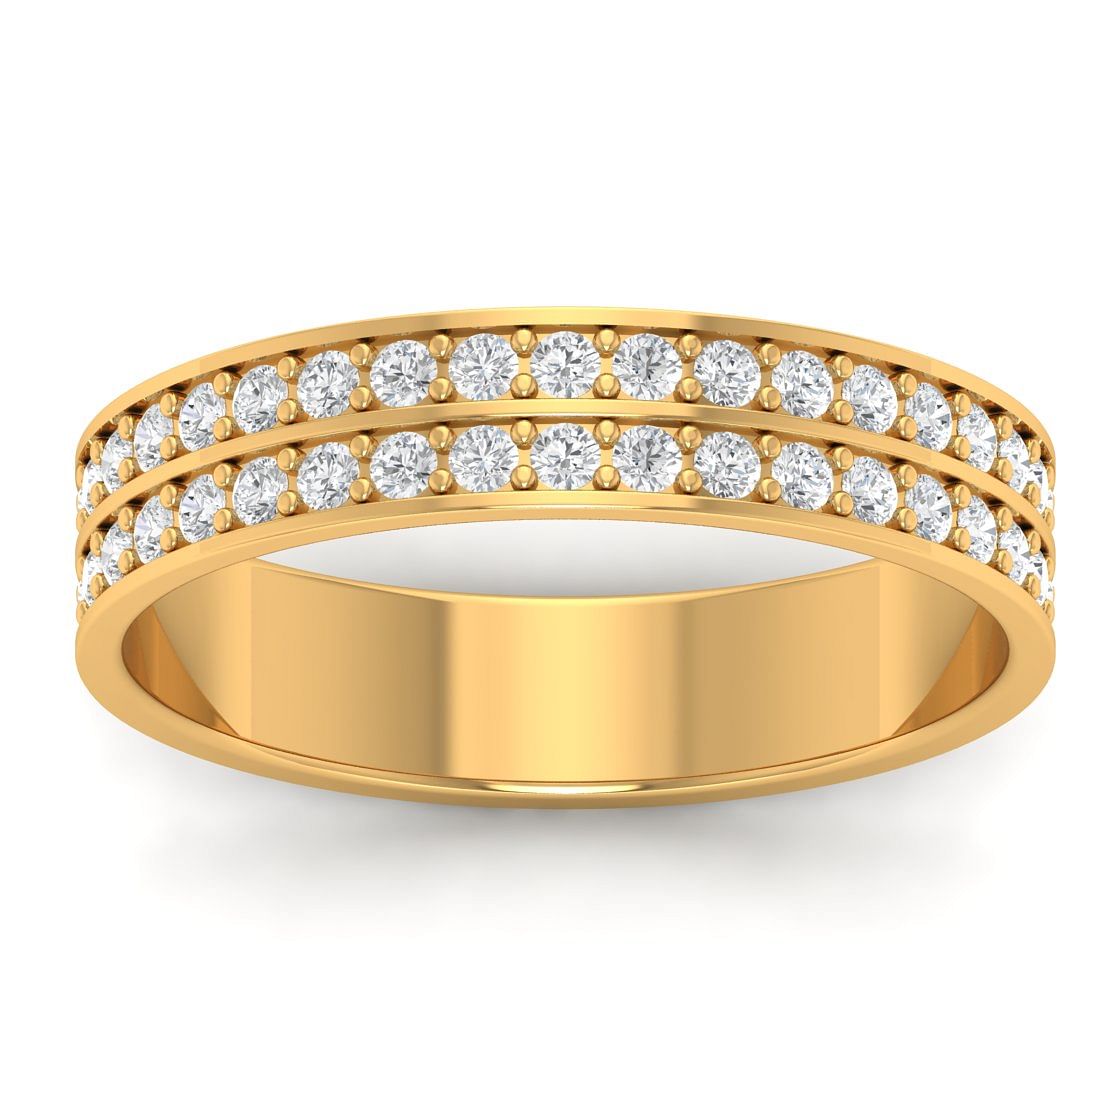 Special Wedding Yellow Gold Ring For Her